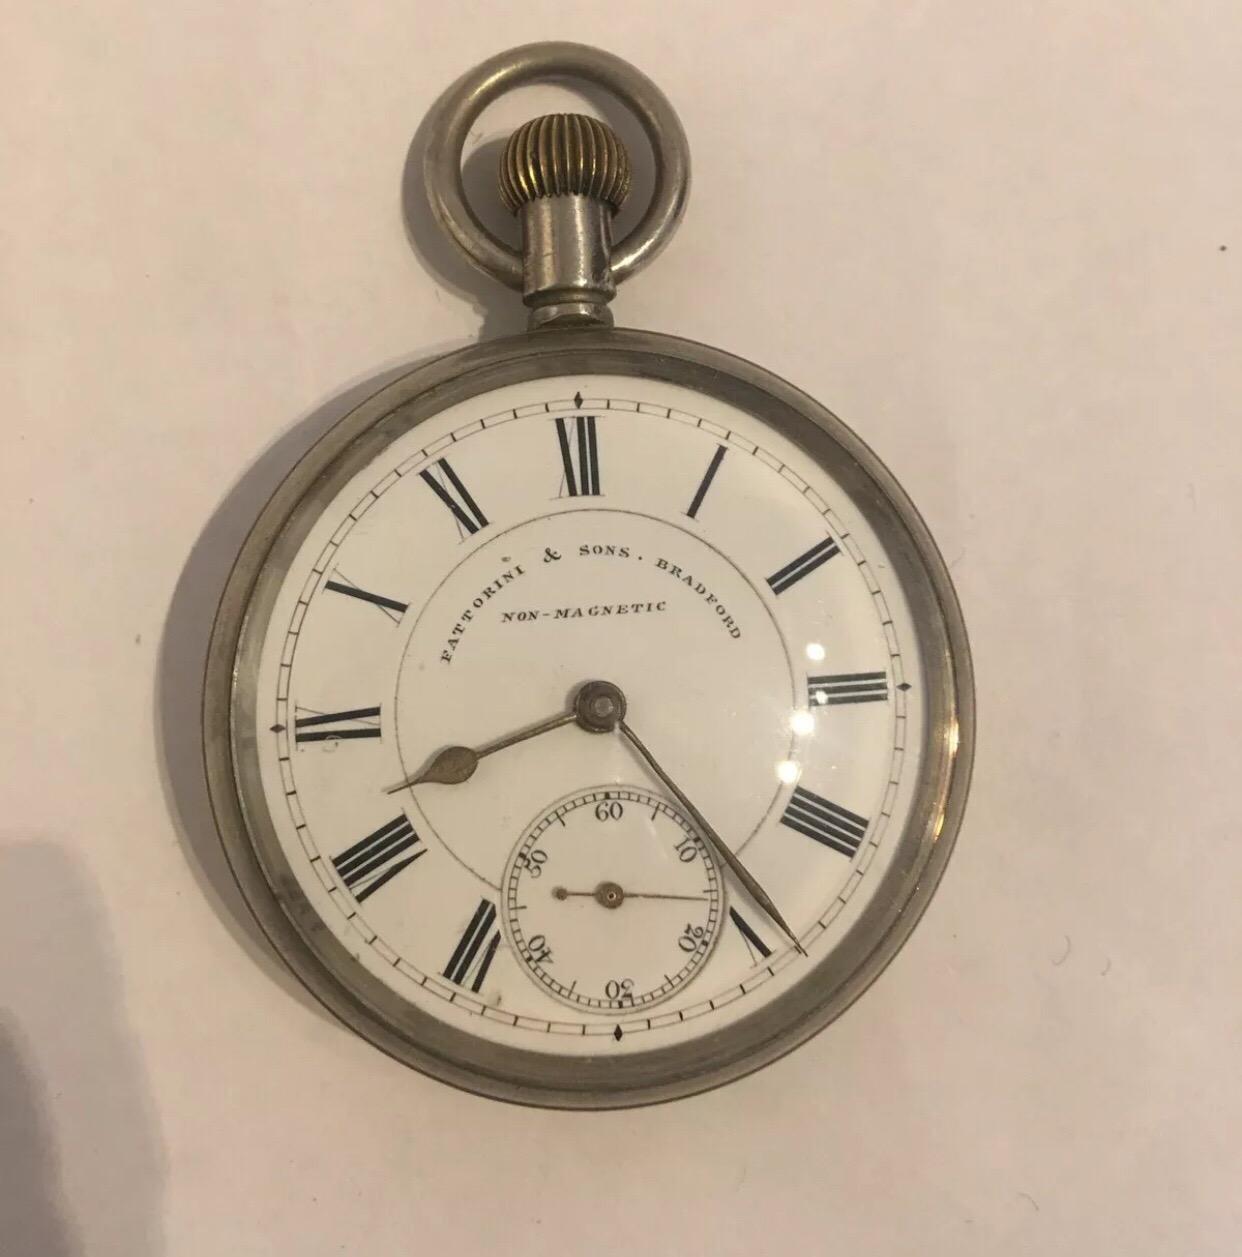 Women's or Men's Antique Waltham Mass Pocket Watch Signed Fattorini & Sons, Bradford Non Magnetic For Sale